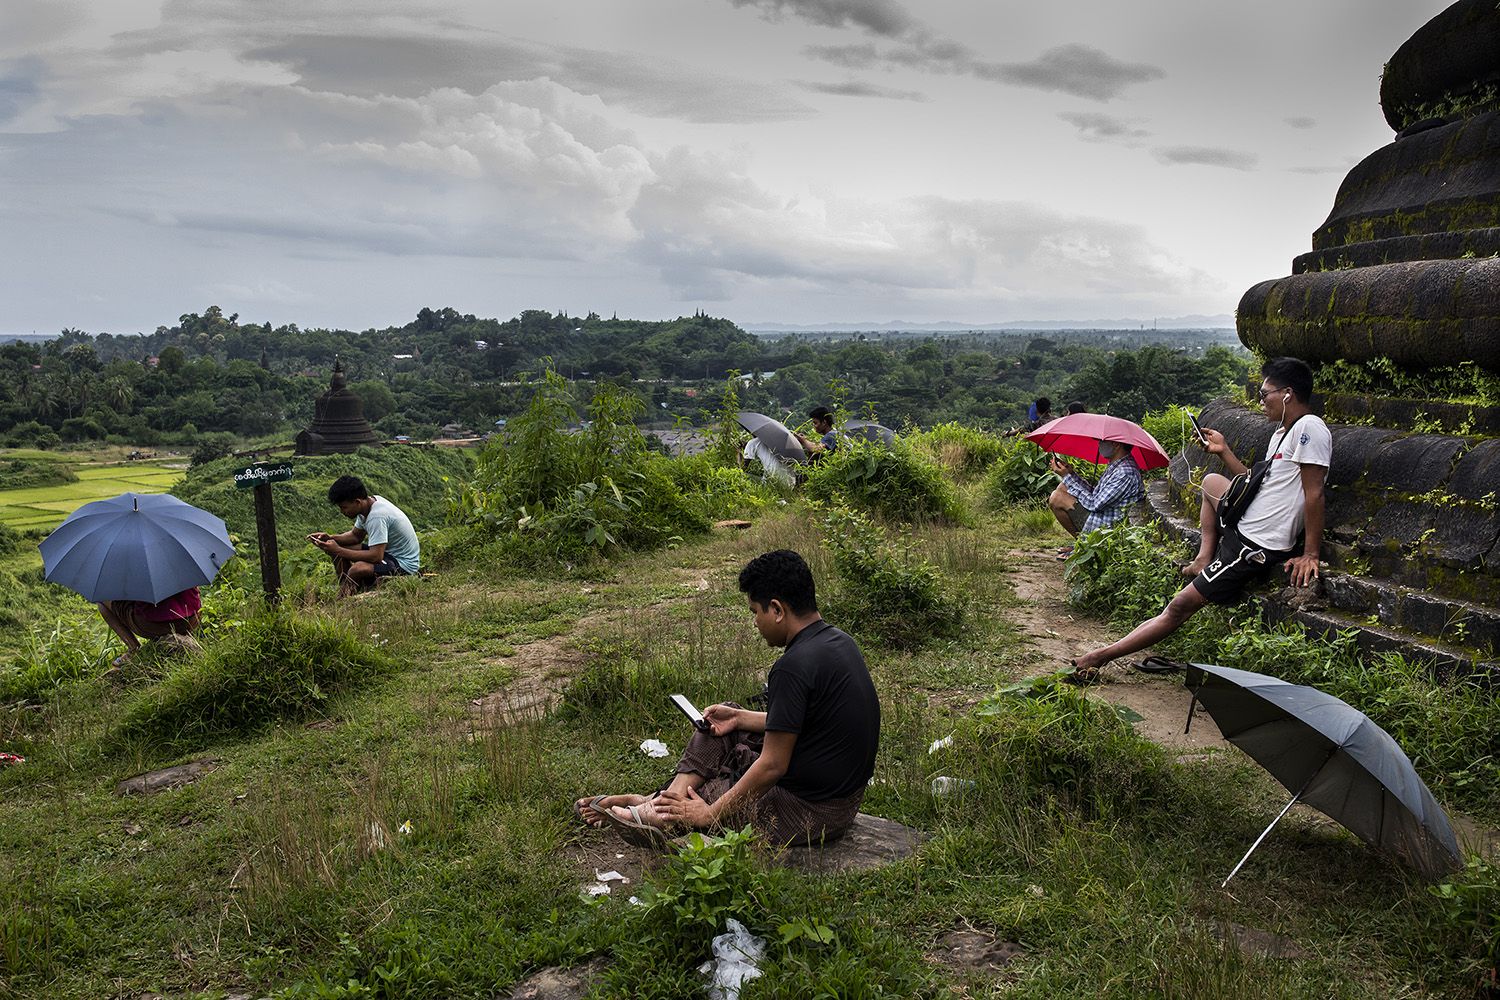 People sit on a hill to search for a 3G signal in Mrauk U, Myanmar, on Aug. 20. The government has blocked high-speed internet in the township since June 2019. Image by Hkun Lat/Foreign Policy. Myanmar, 2020.